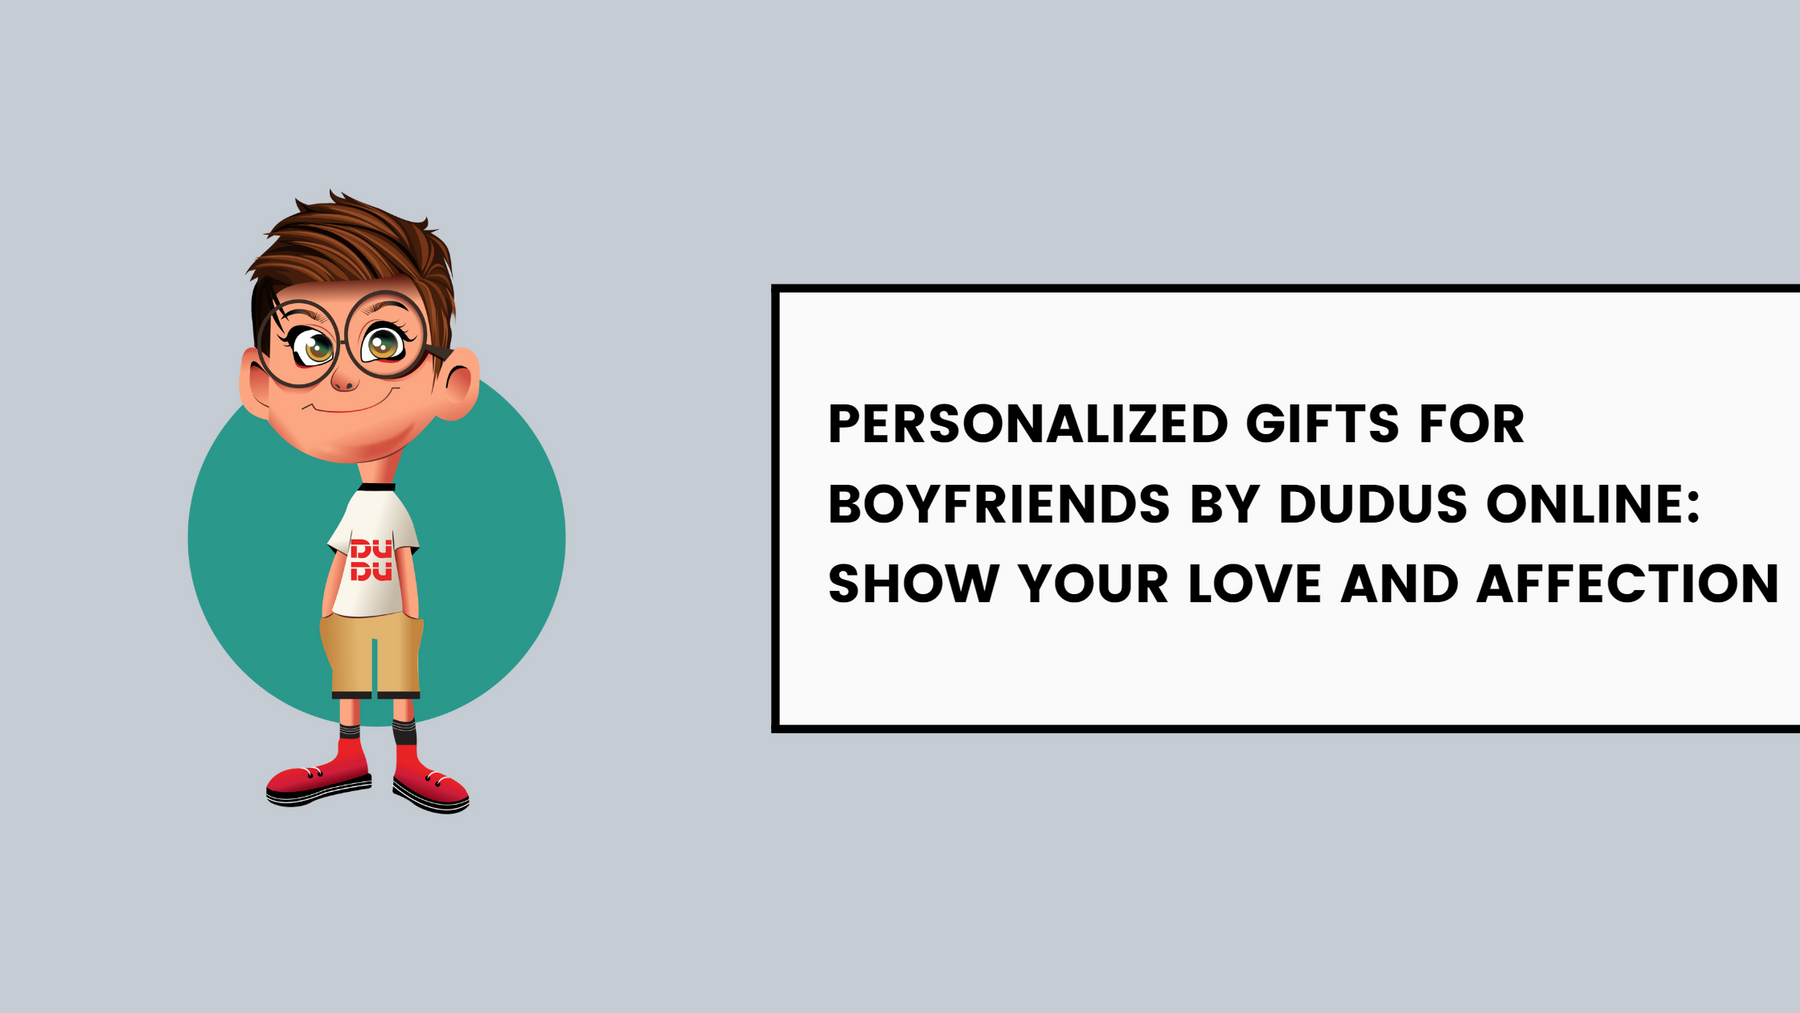 Personalized Gifts For Boyfriends By Dudus Online: Show Your Love And Affection